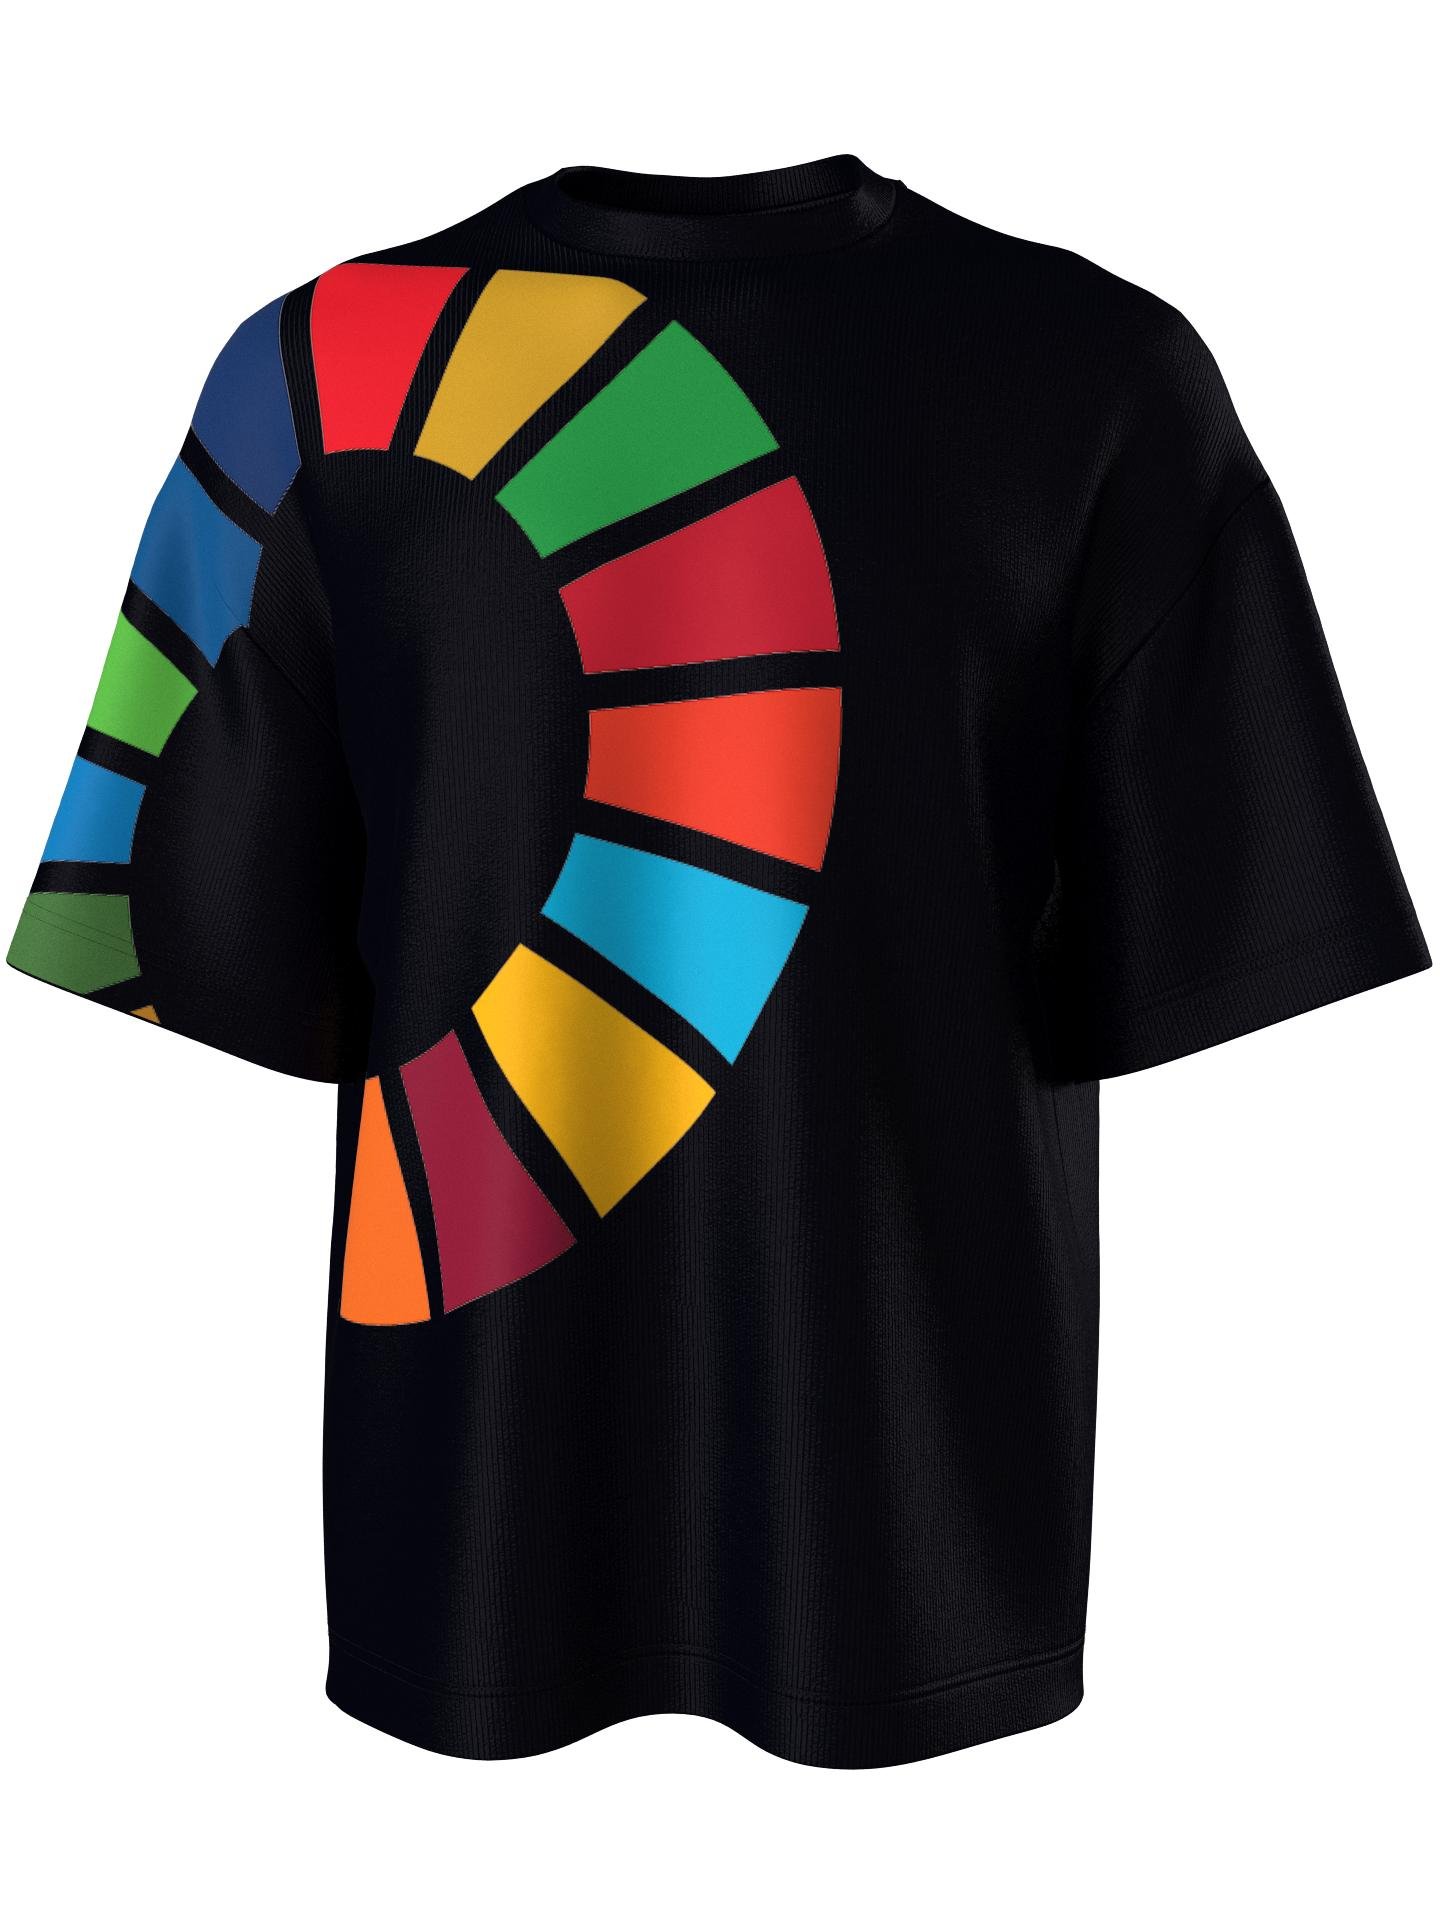 T-shirt with color wheel - black by SDGS INSPIRED COLLECTION